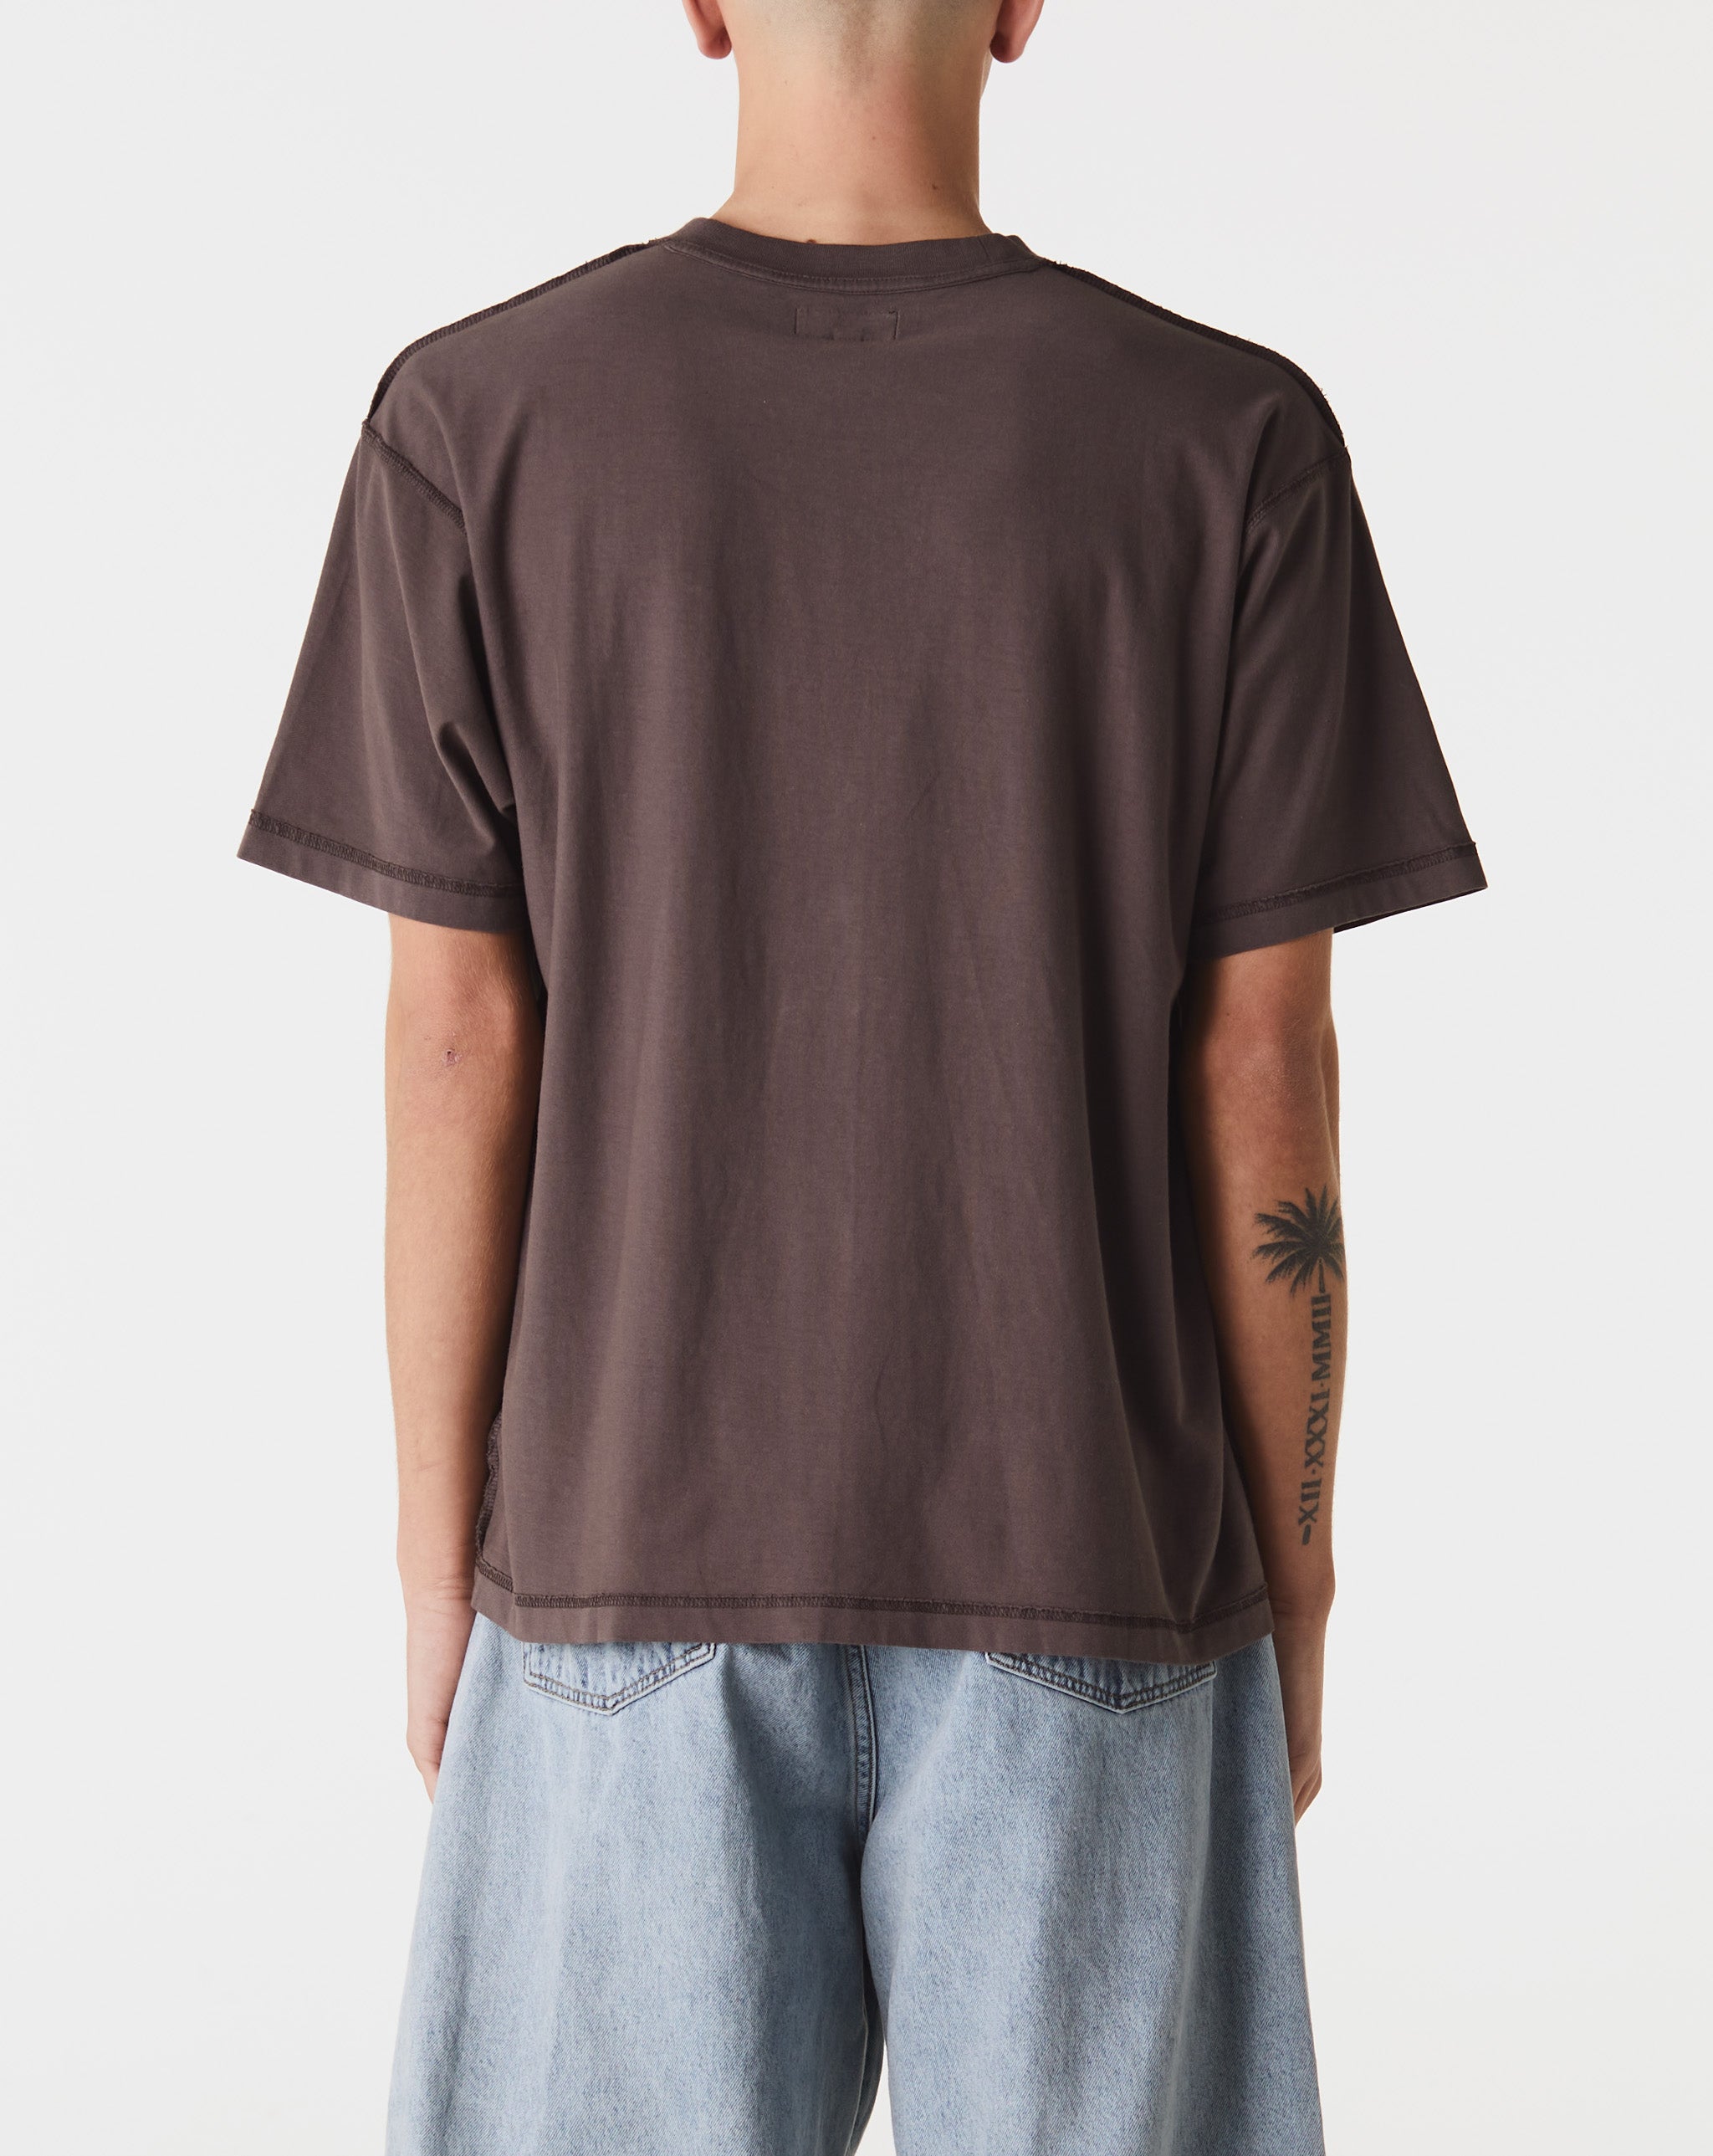 Stüssy Pigment Dyed inside Out T-Shirt  - XHIBITION